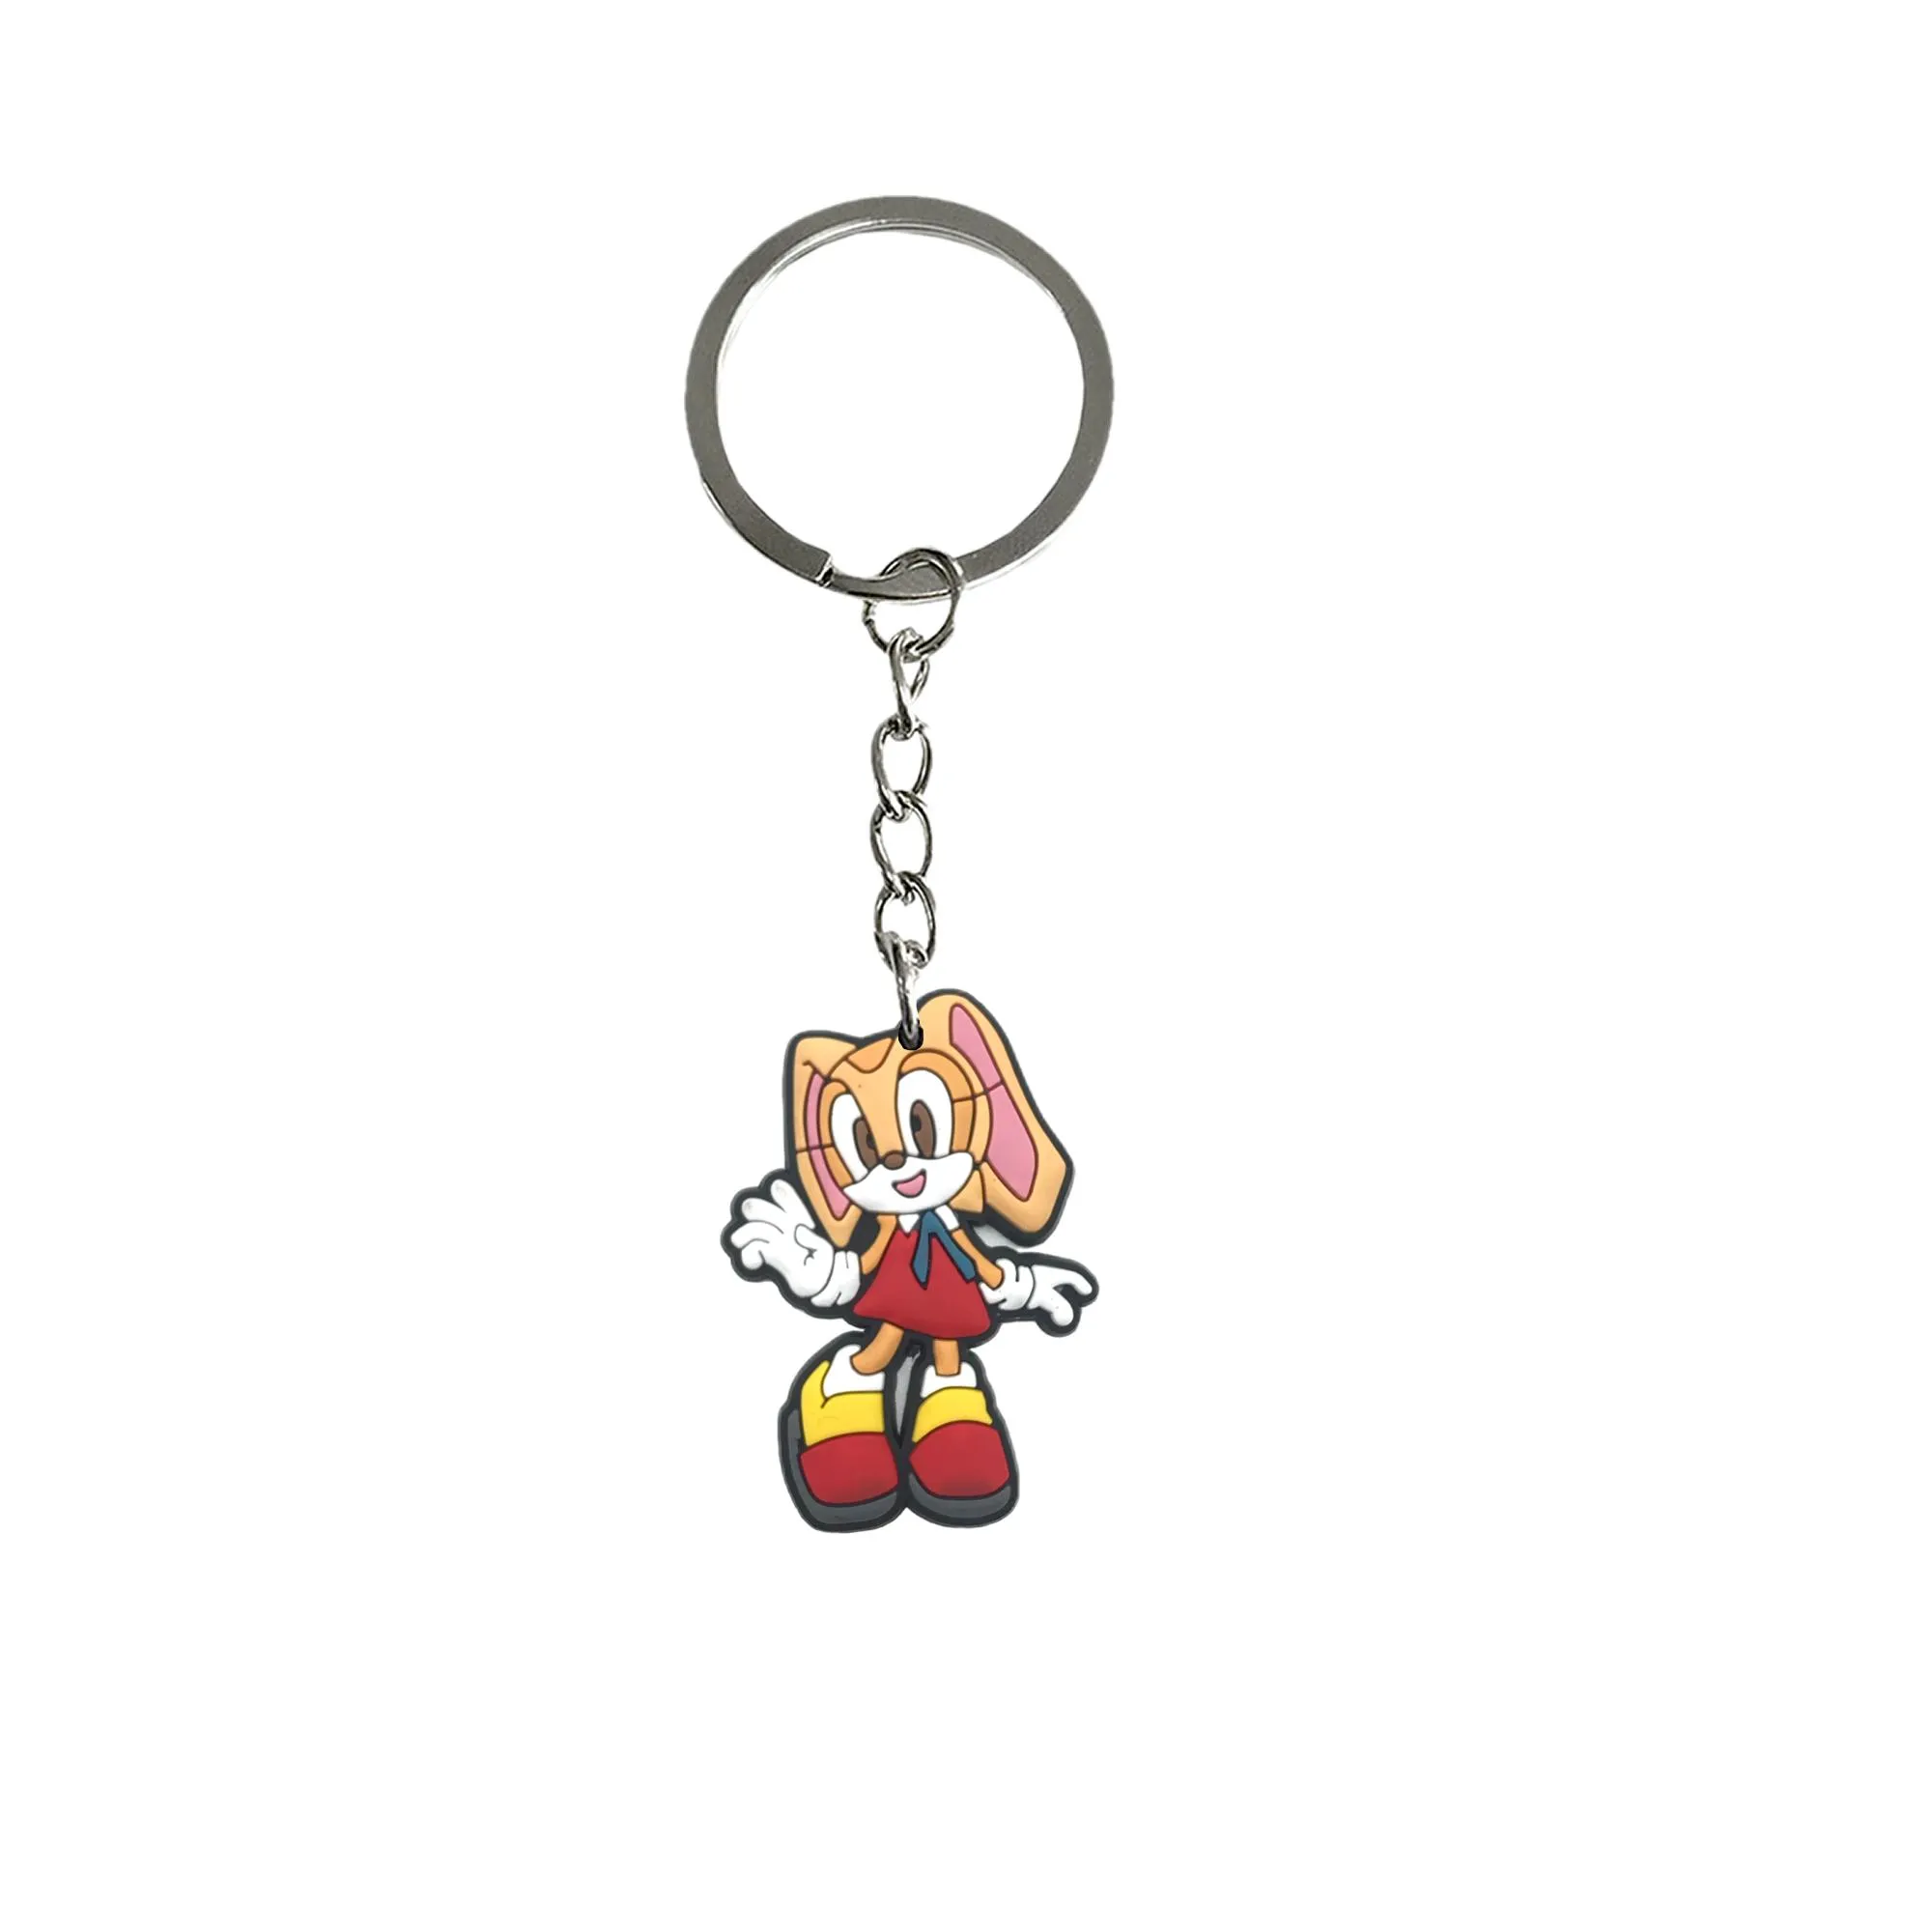 sonic 38 keychain cool colorful anime character with wristlet keyring for school bags backpack keyrings suitable schoolbag keychains childrens party favors